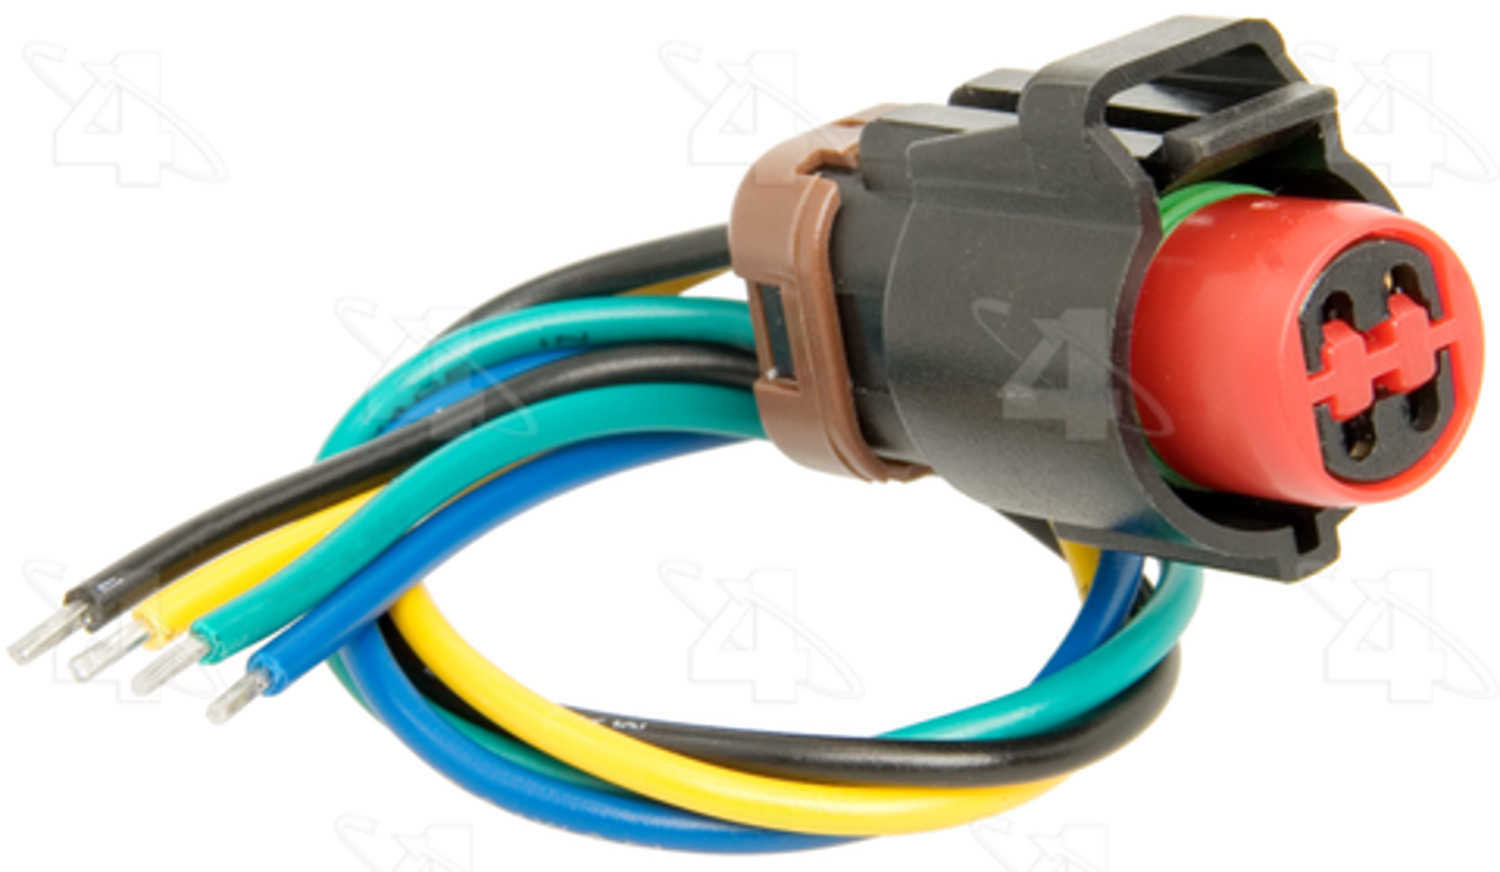 FOUR SEASONS - A/C Compressor Cut-Out Switch Harness Connector - FSE 37235